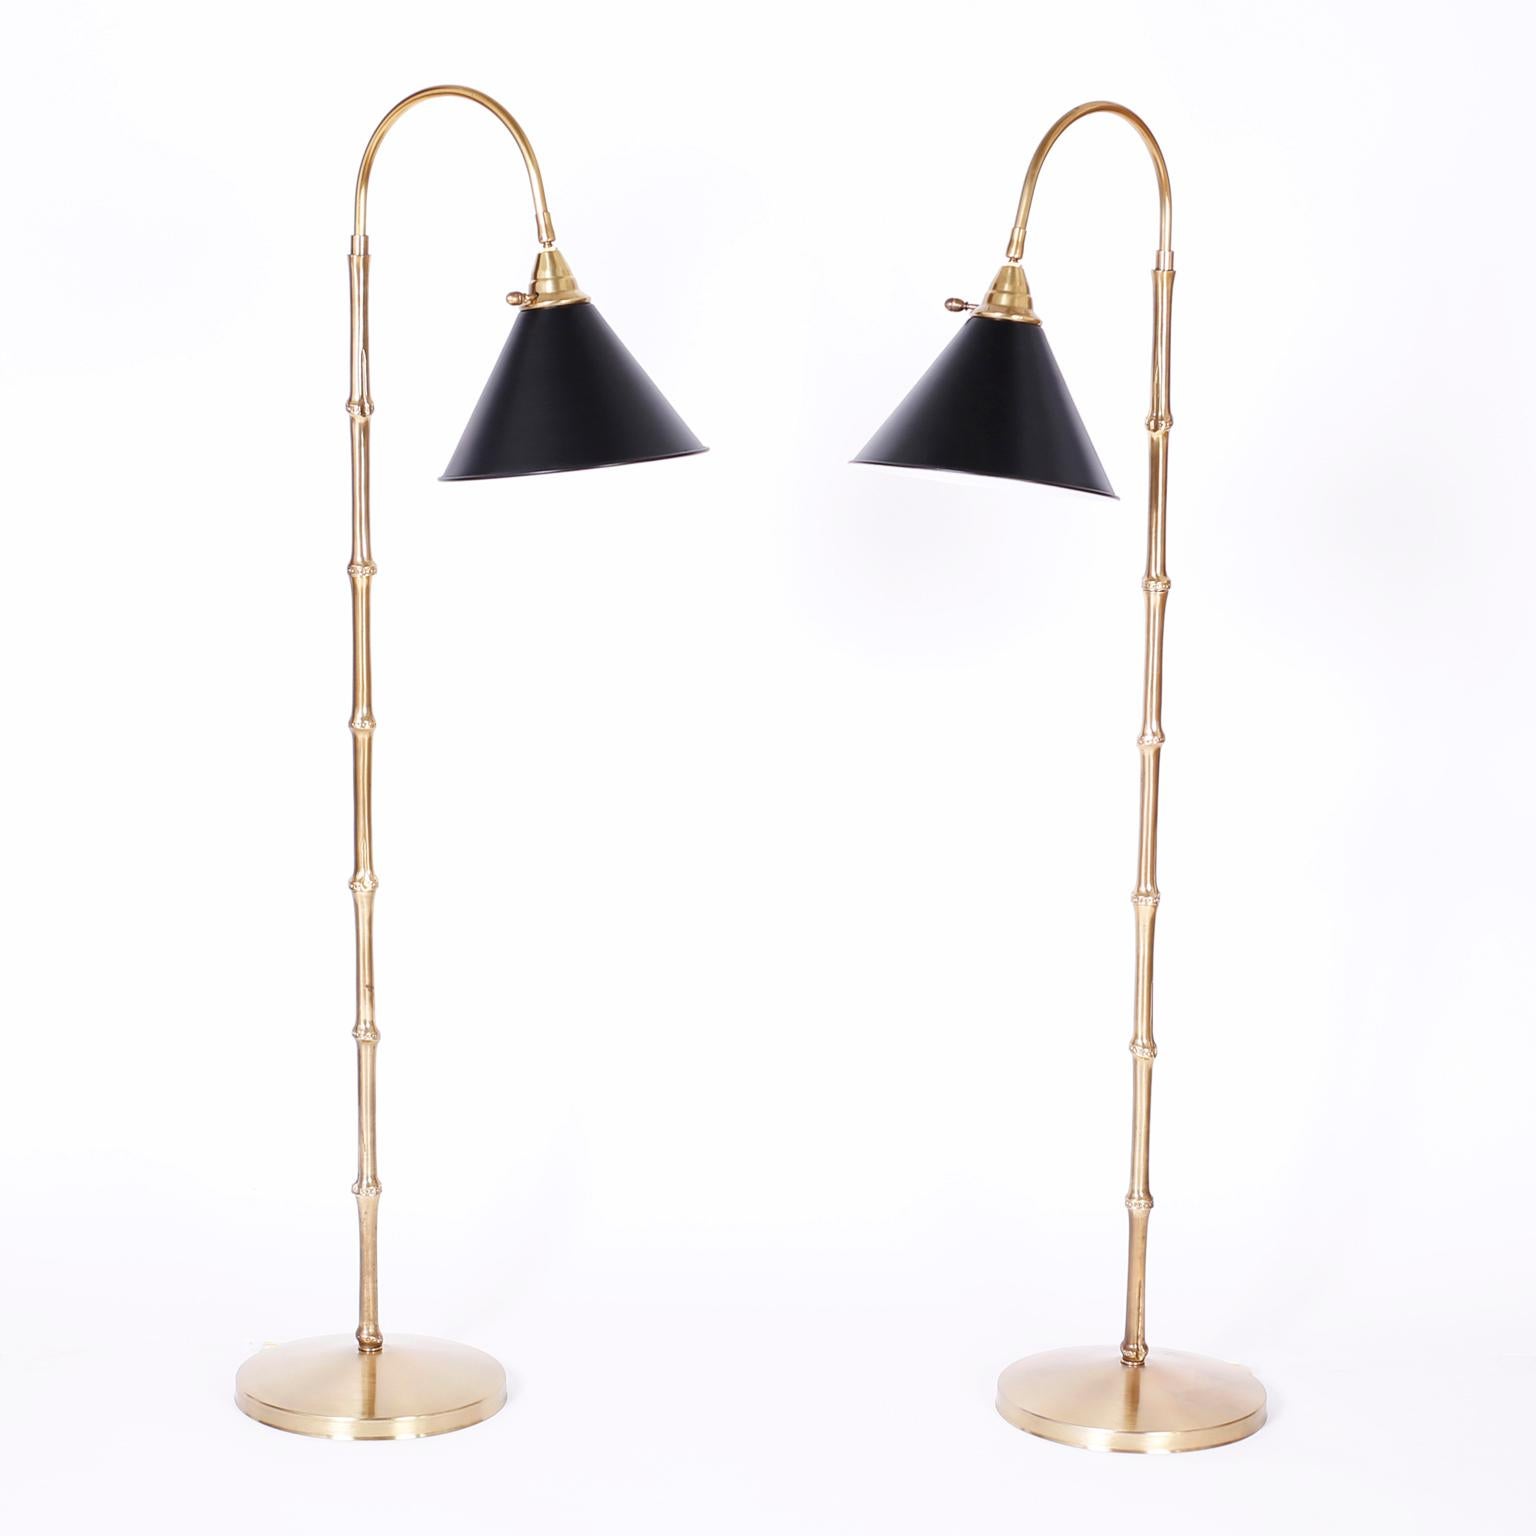 Chic midcentury pair of floor lamps with black shades that swivel on a brass gooseneck and stand with a faux bamboo motif on a round brass base. Hand polished and lacquered for easy care. Probably by Chapman.